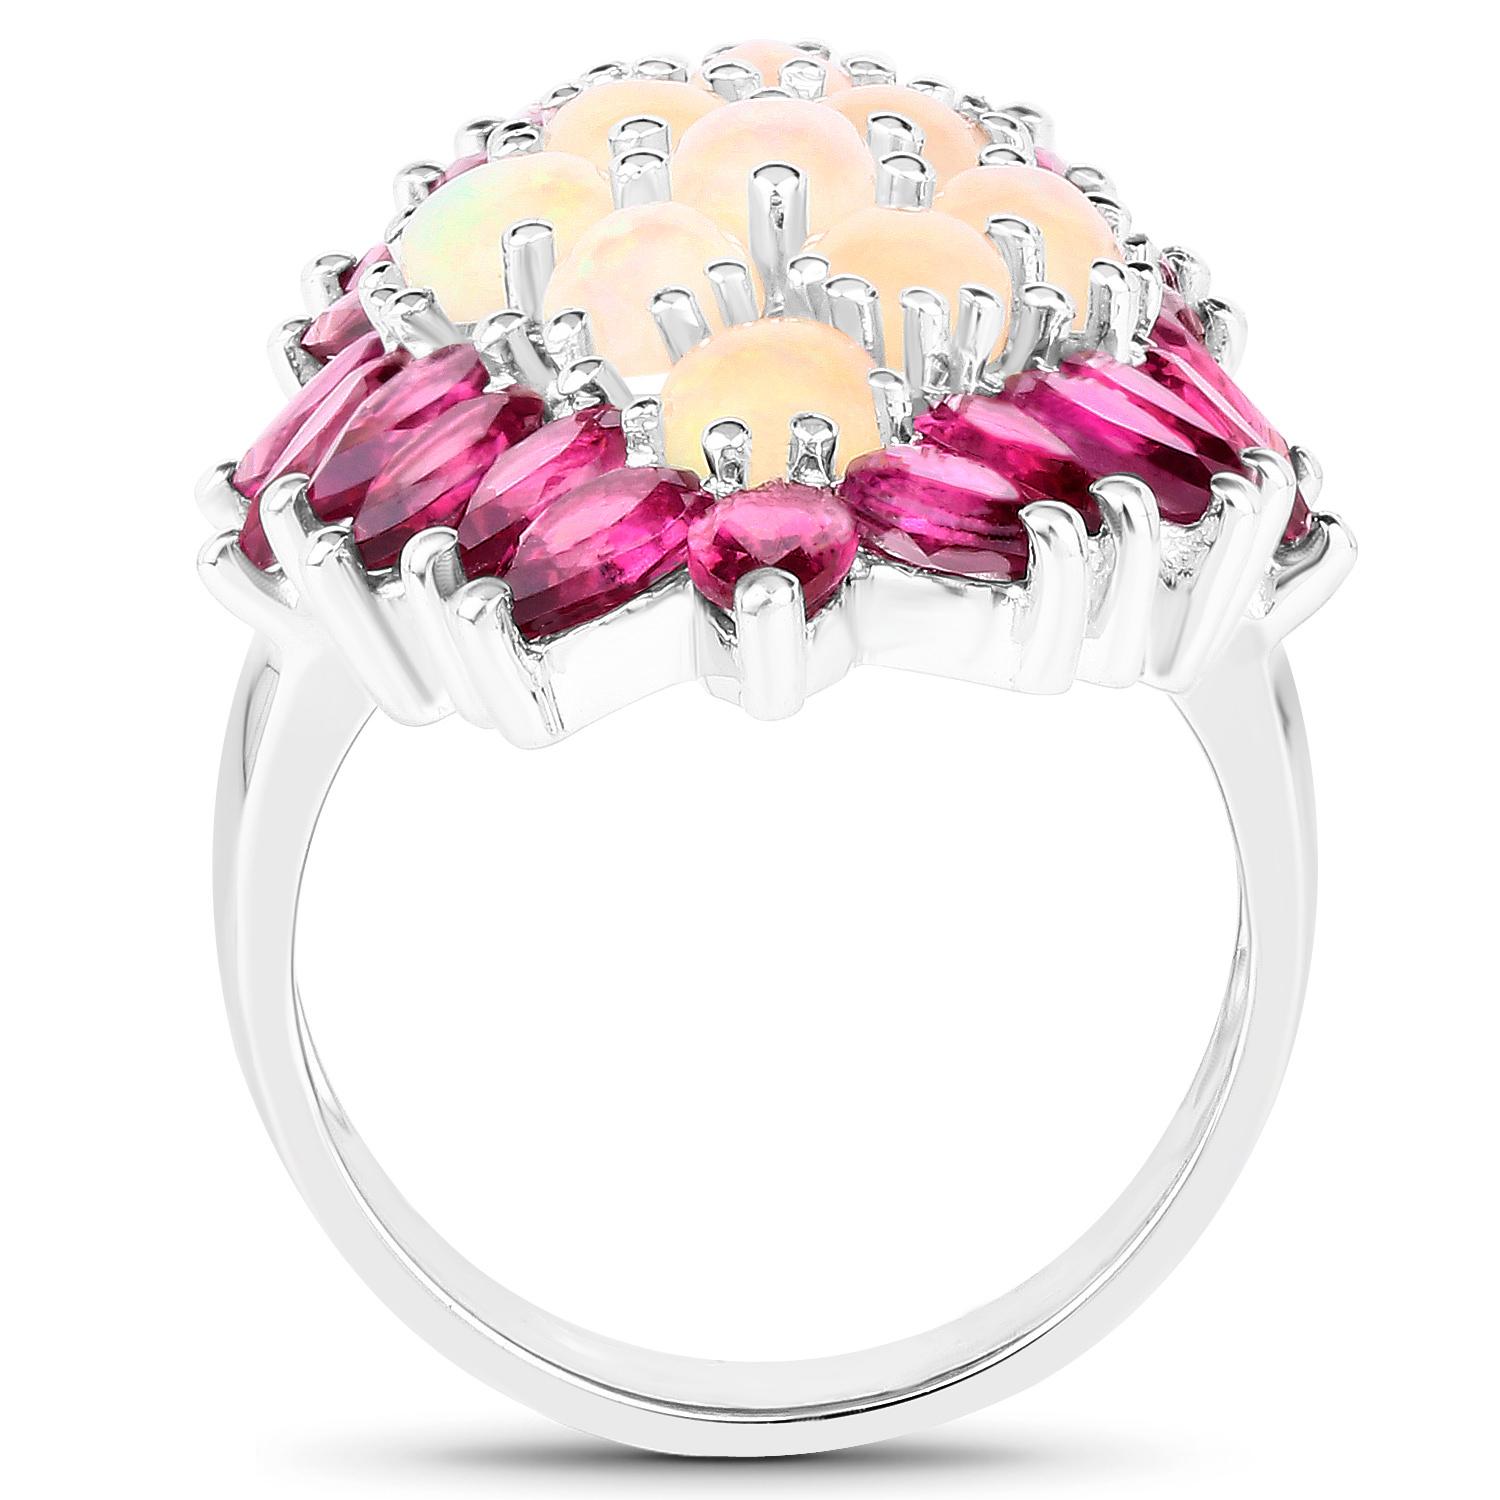 Contemporary Natural Opals and Rhodolite Garnets Cocktail Ring 8.40 Carats For Sale